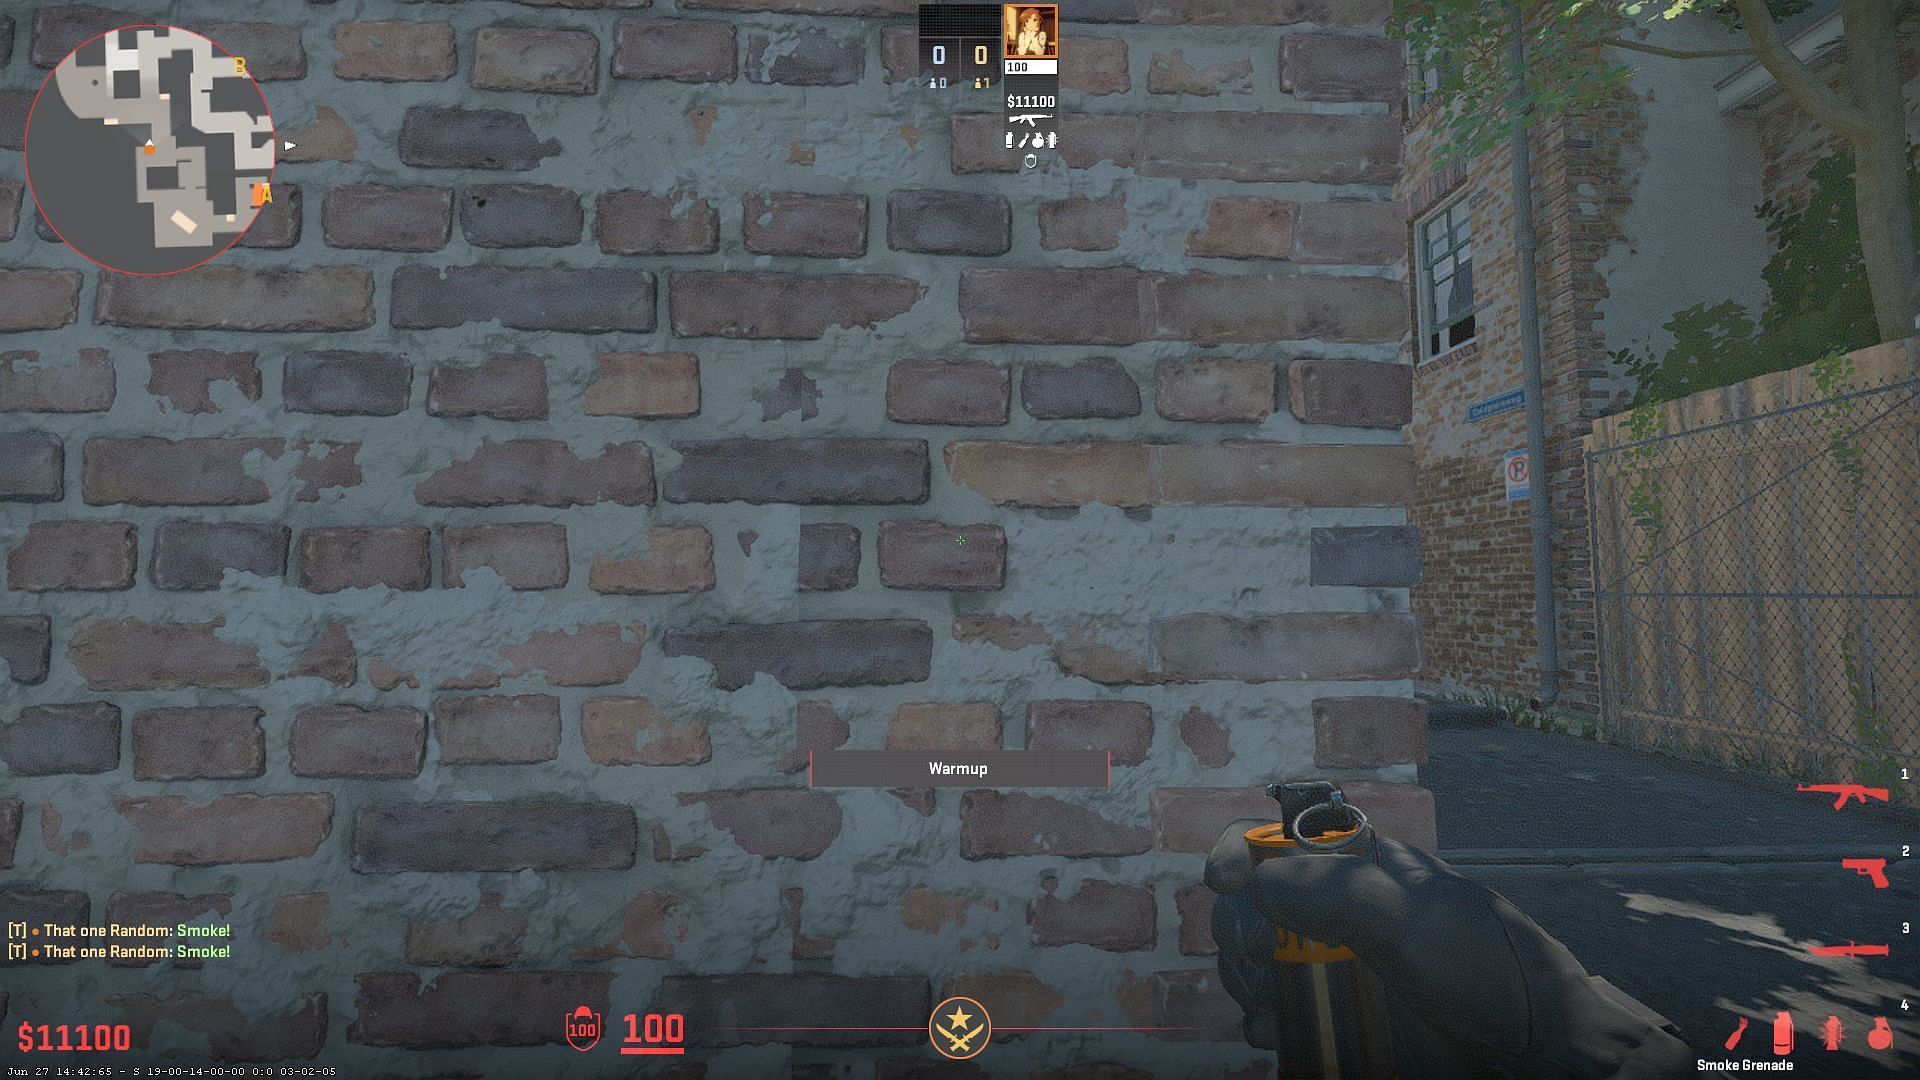 Align yourself to the brick on the crosshair and Hug the wall (Image via Valve)